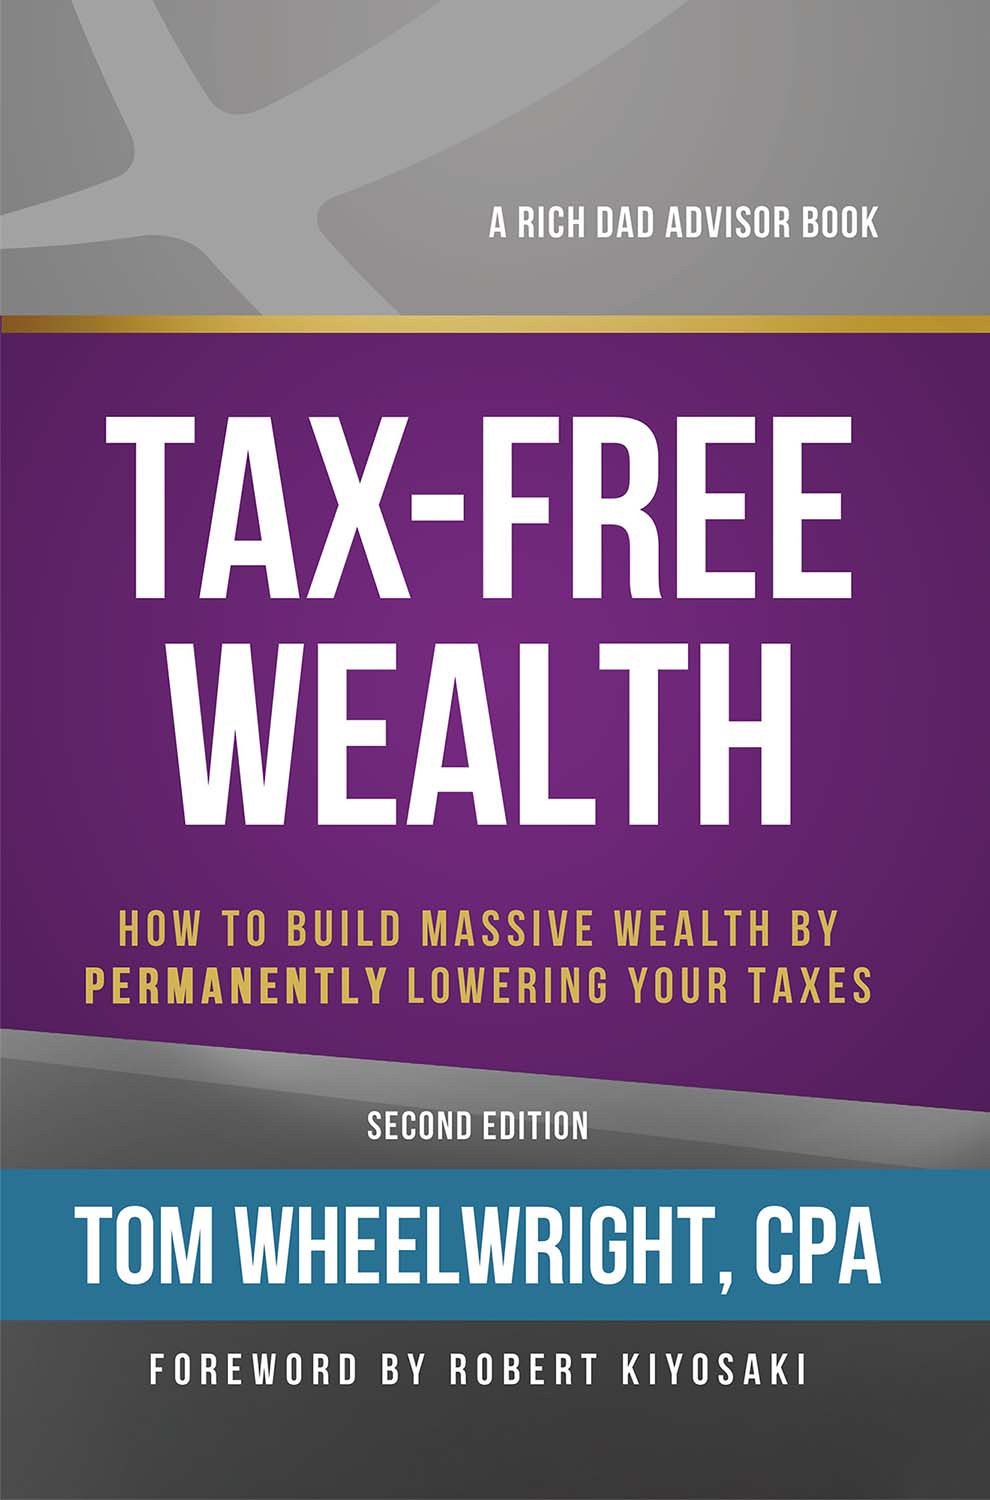 Best-selling book, Tax-Free Wealth by CPA, CEO and Speaker Tom Wheelwright, is nowupdated with the New Tax Law updates